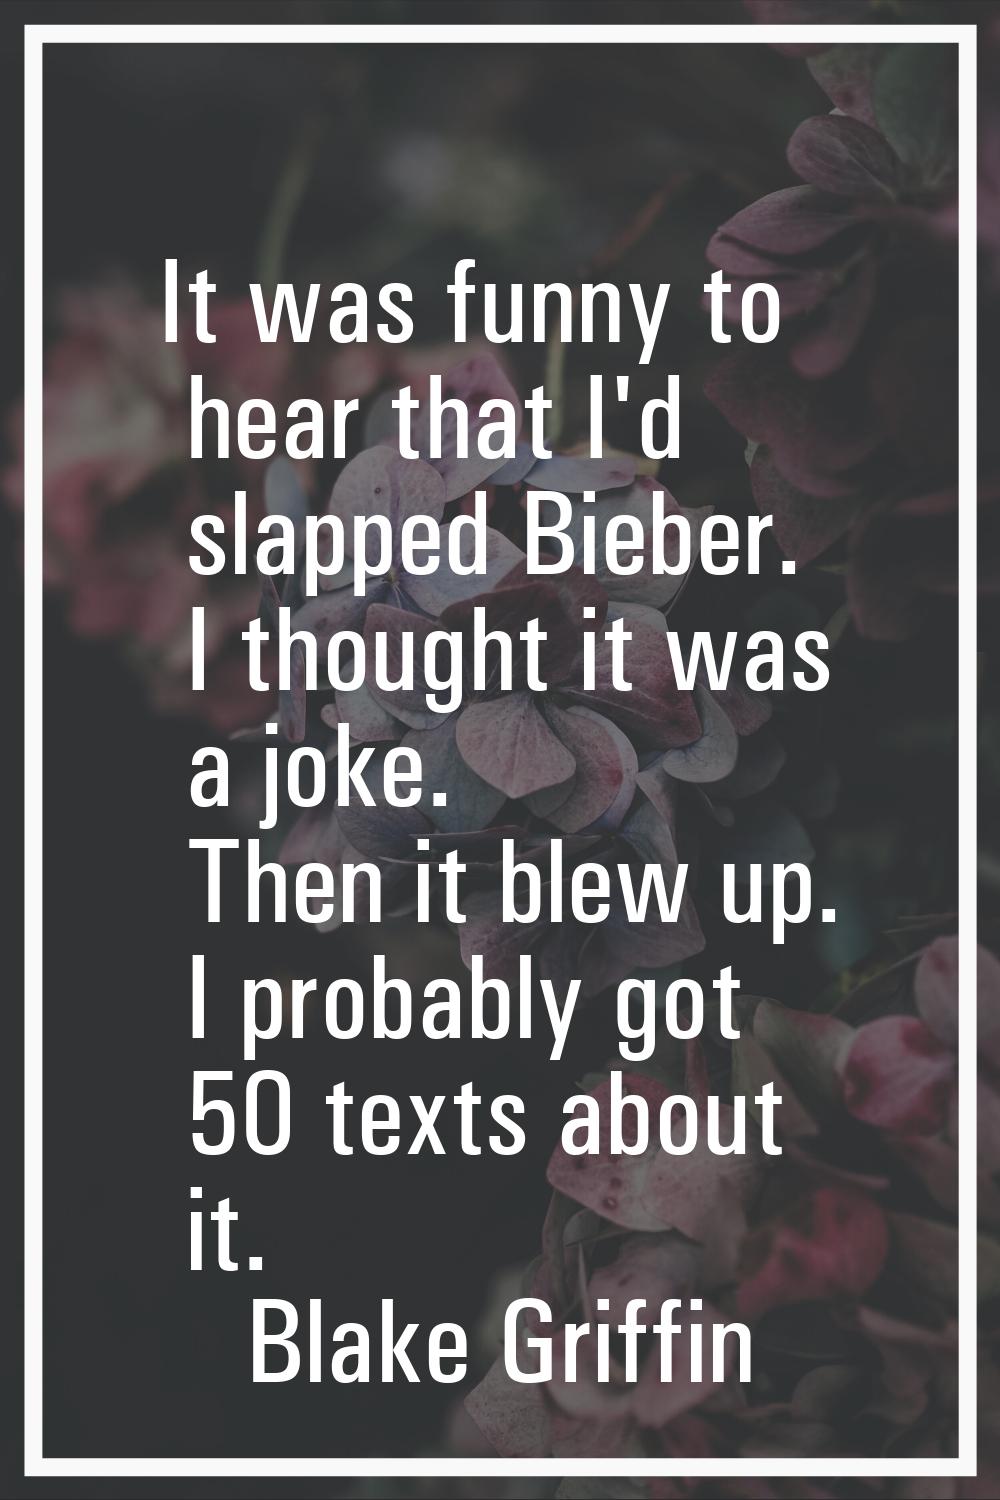 It was funny to hear that I'd slapped Bieber. I thought it was a joke. Then it blew up. I probably 